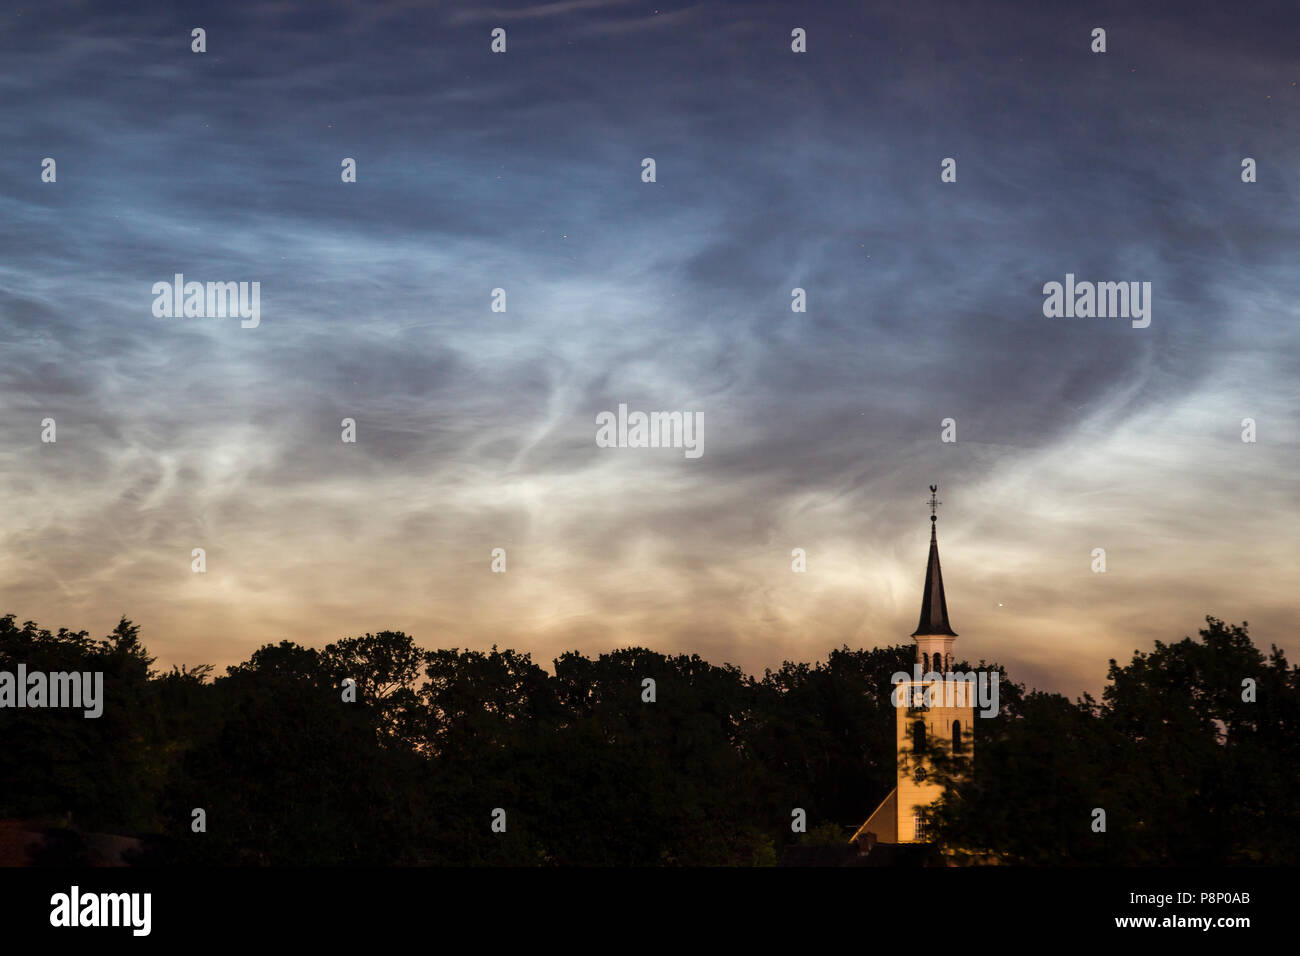 Noctilucent clouds over a church tower with the clock at three a.m. Stock Photo